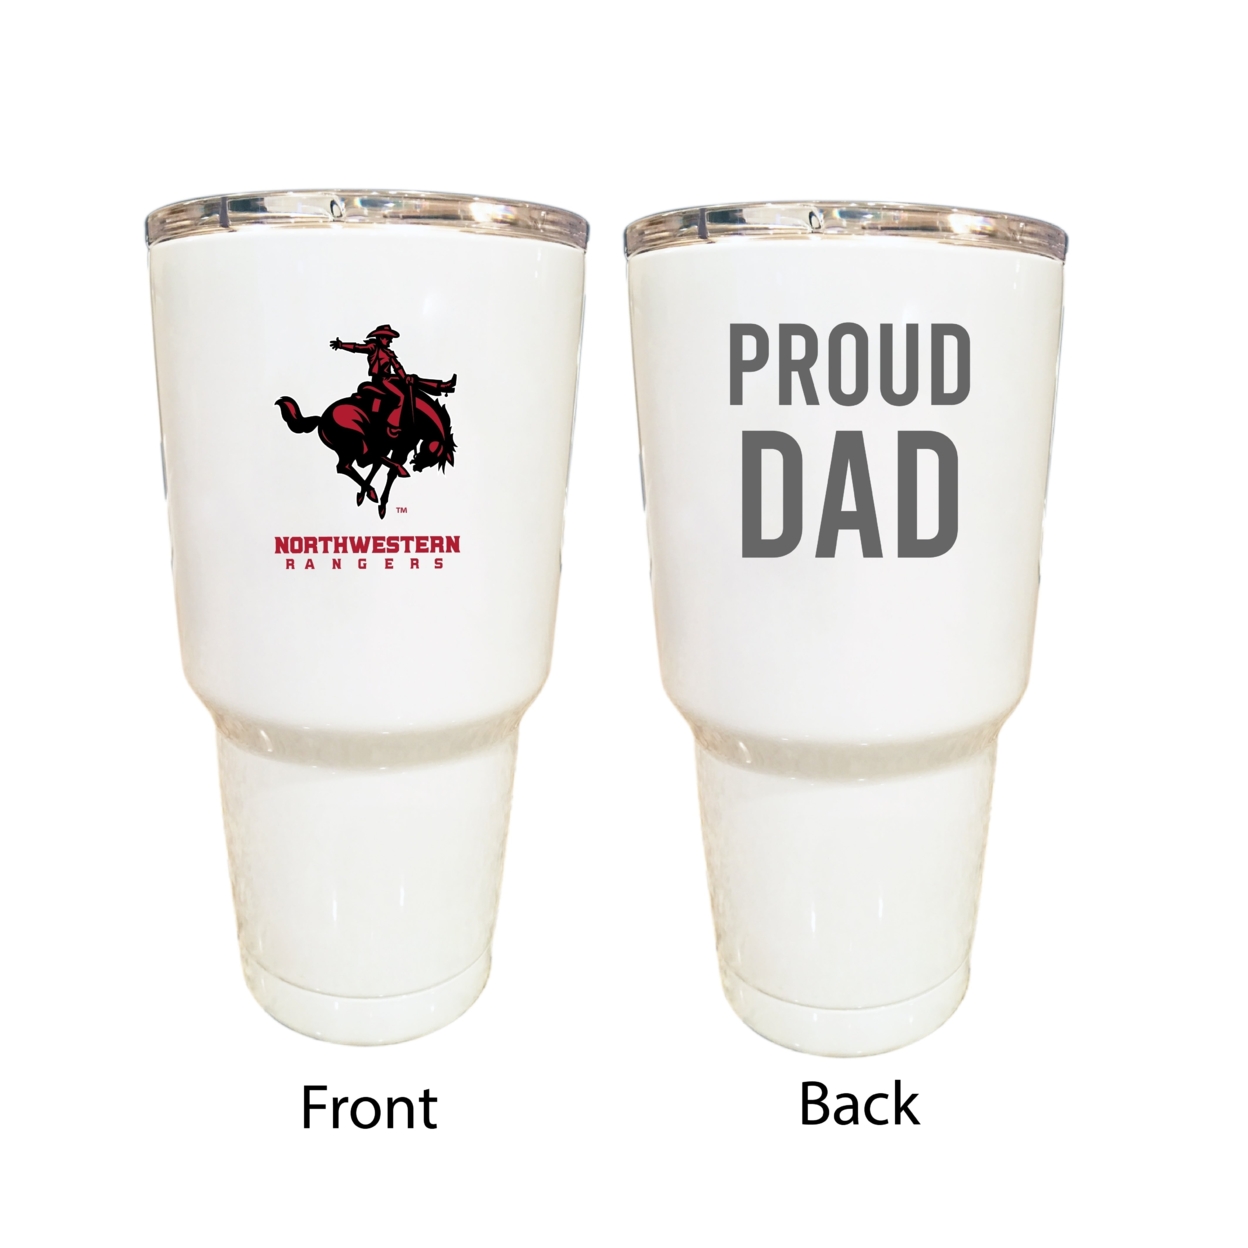 Northwestern Oklahoma State University Proud Dad 24 Oz Insulated Stainless Steel Tumblers Choose Your Color.